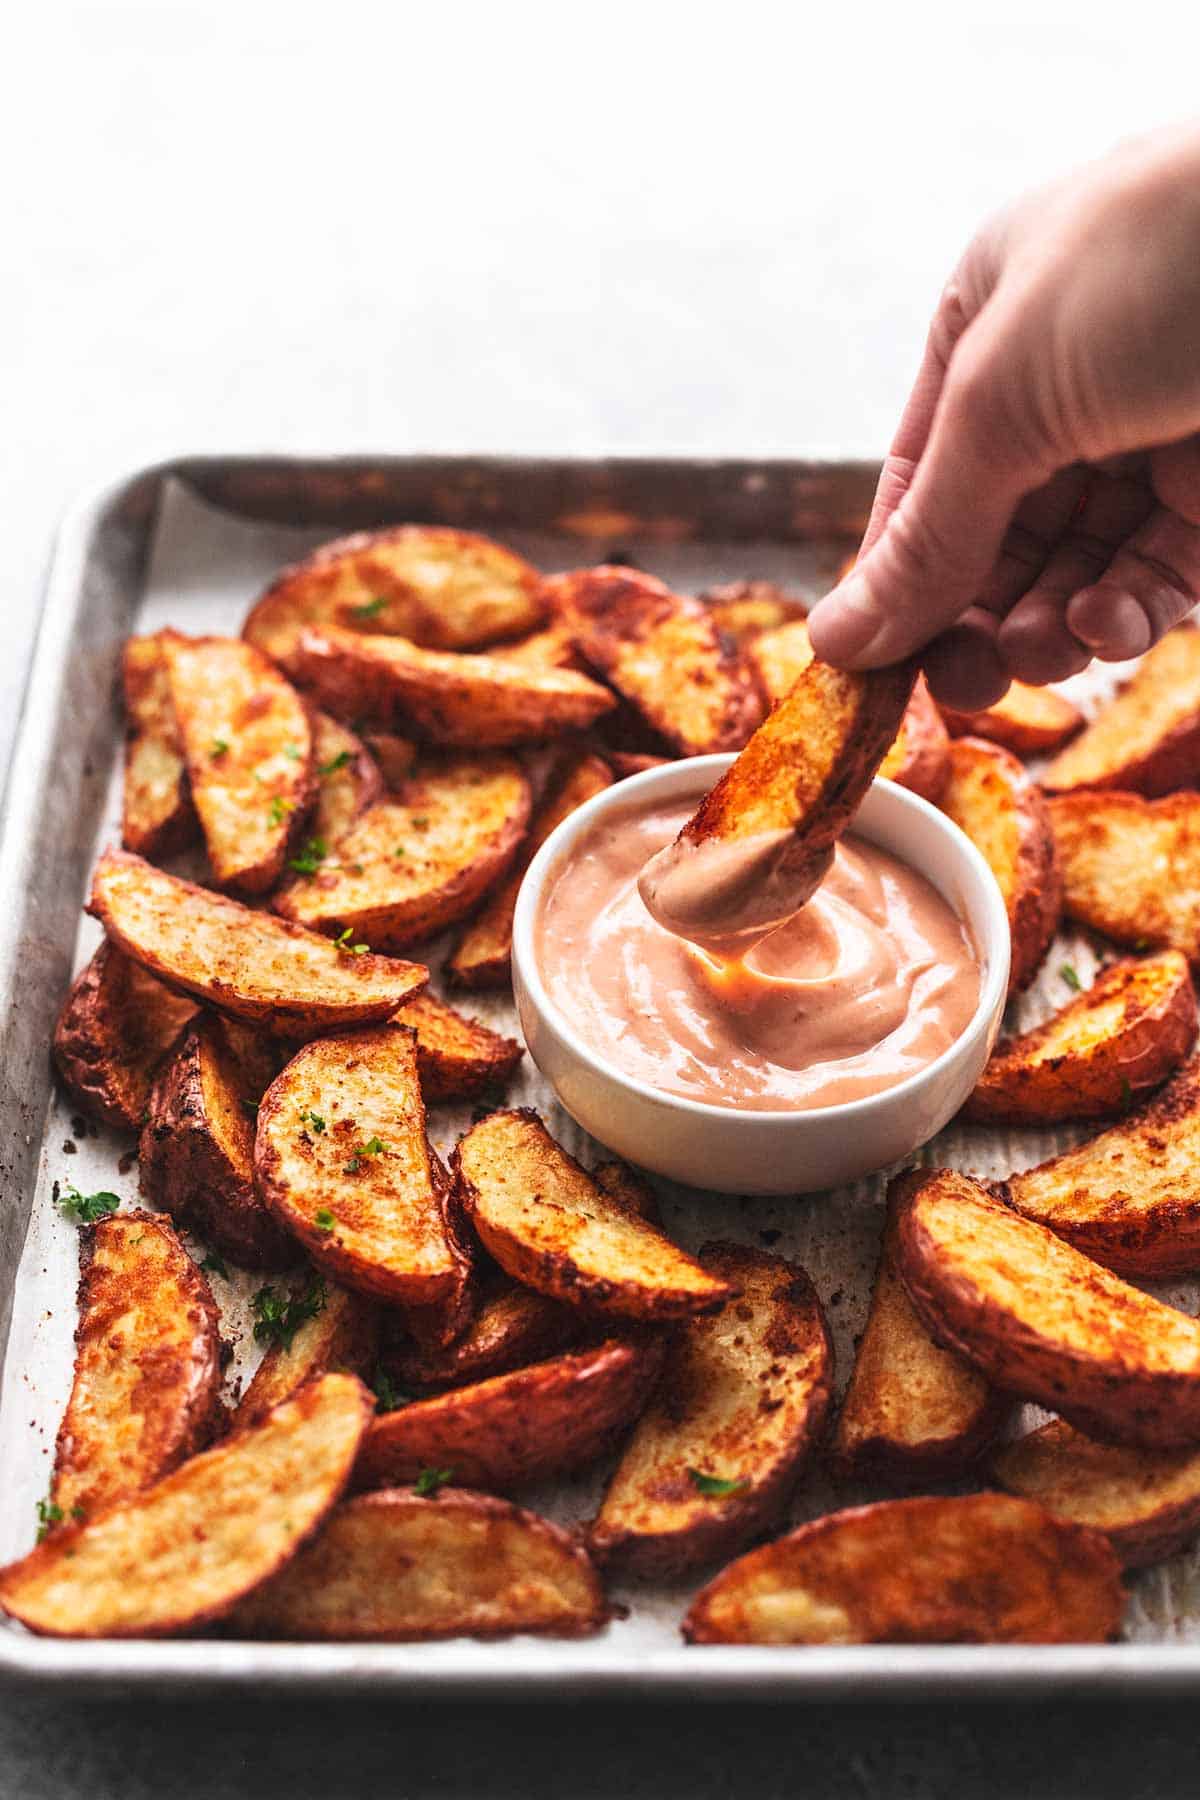 hand dipping single baked potato wedge into brown sauce in front of more potato wedges